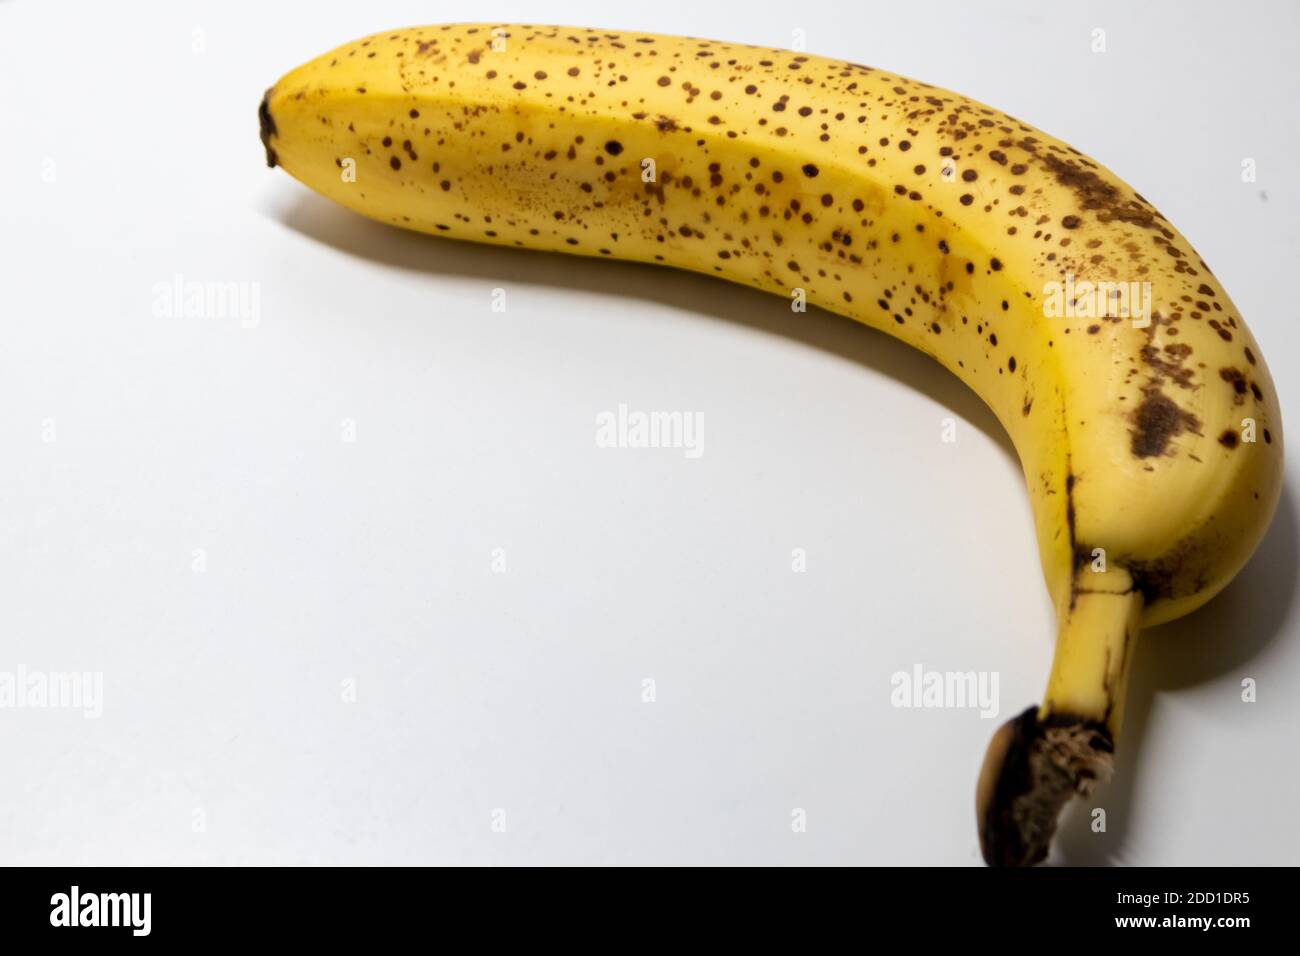 Overripe banana with black dots on white background shows healthy nutrition for vegetarians and vegans with dark spots as studio shot ingredient conta Stock Photo